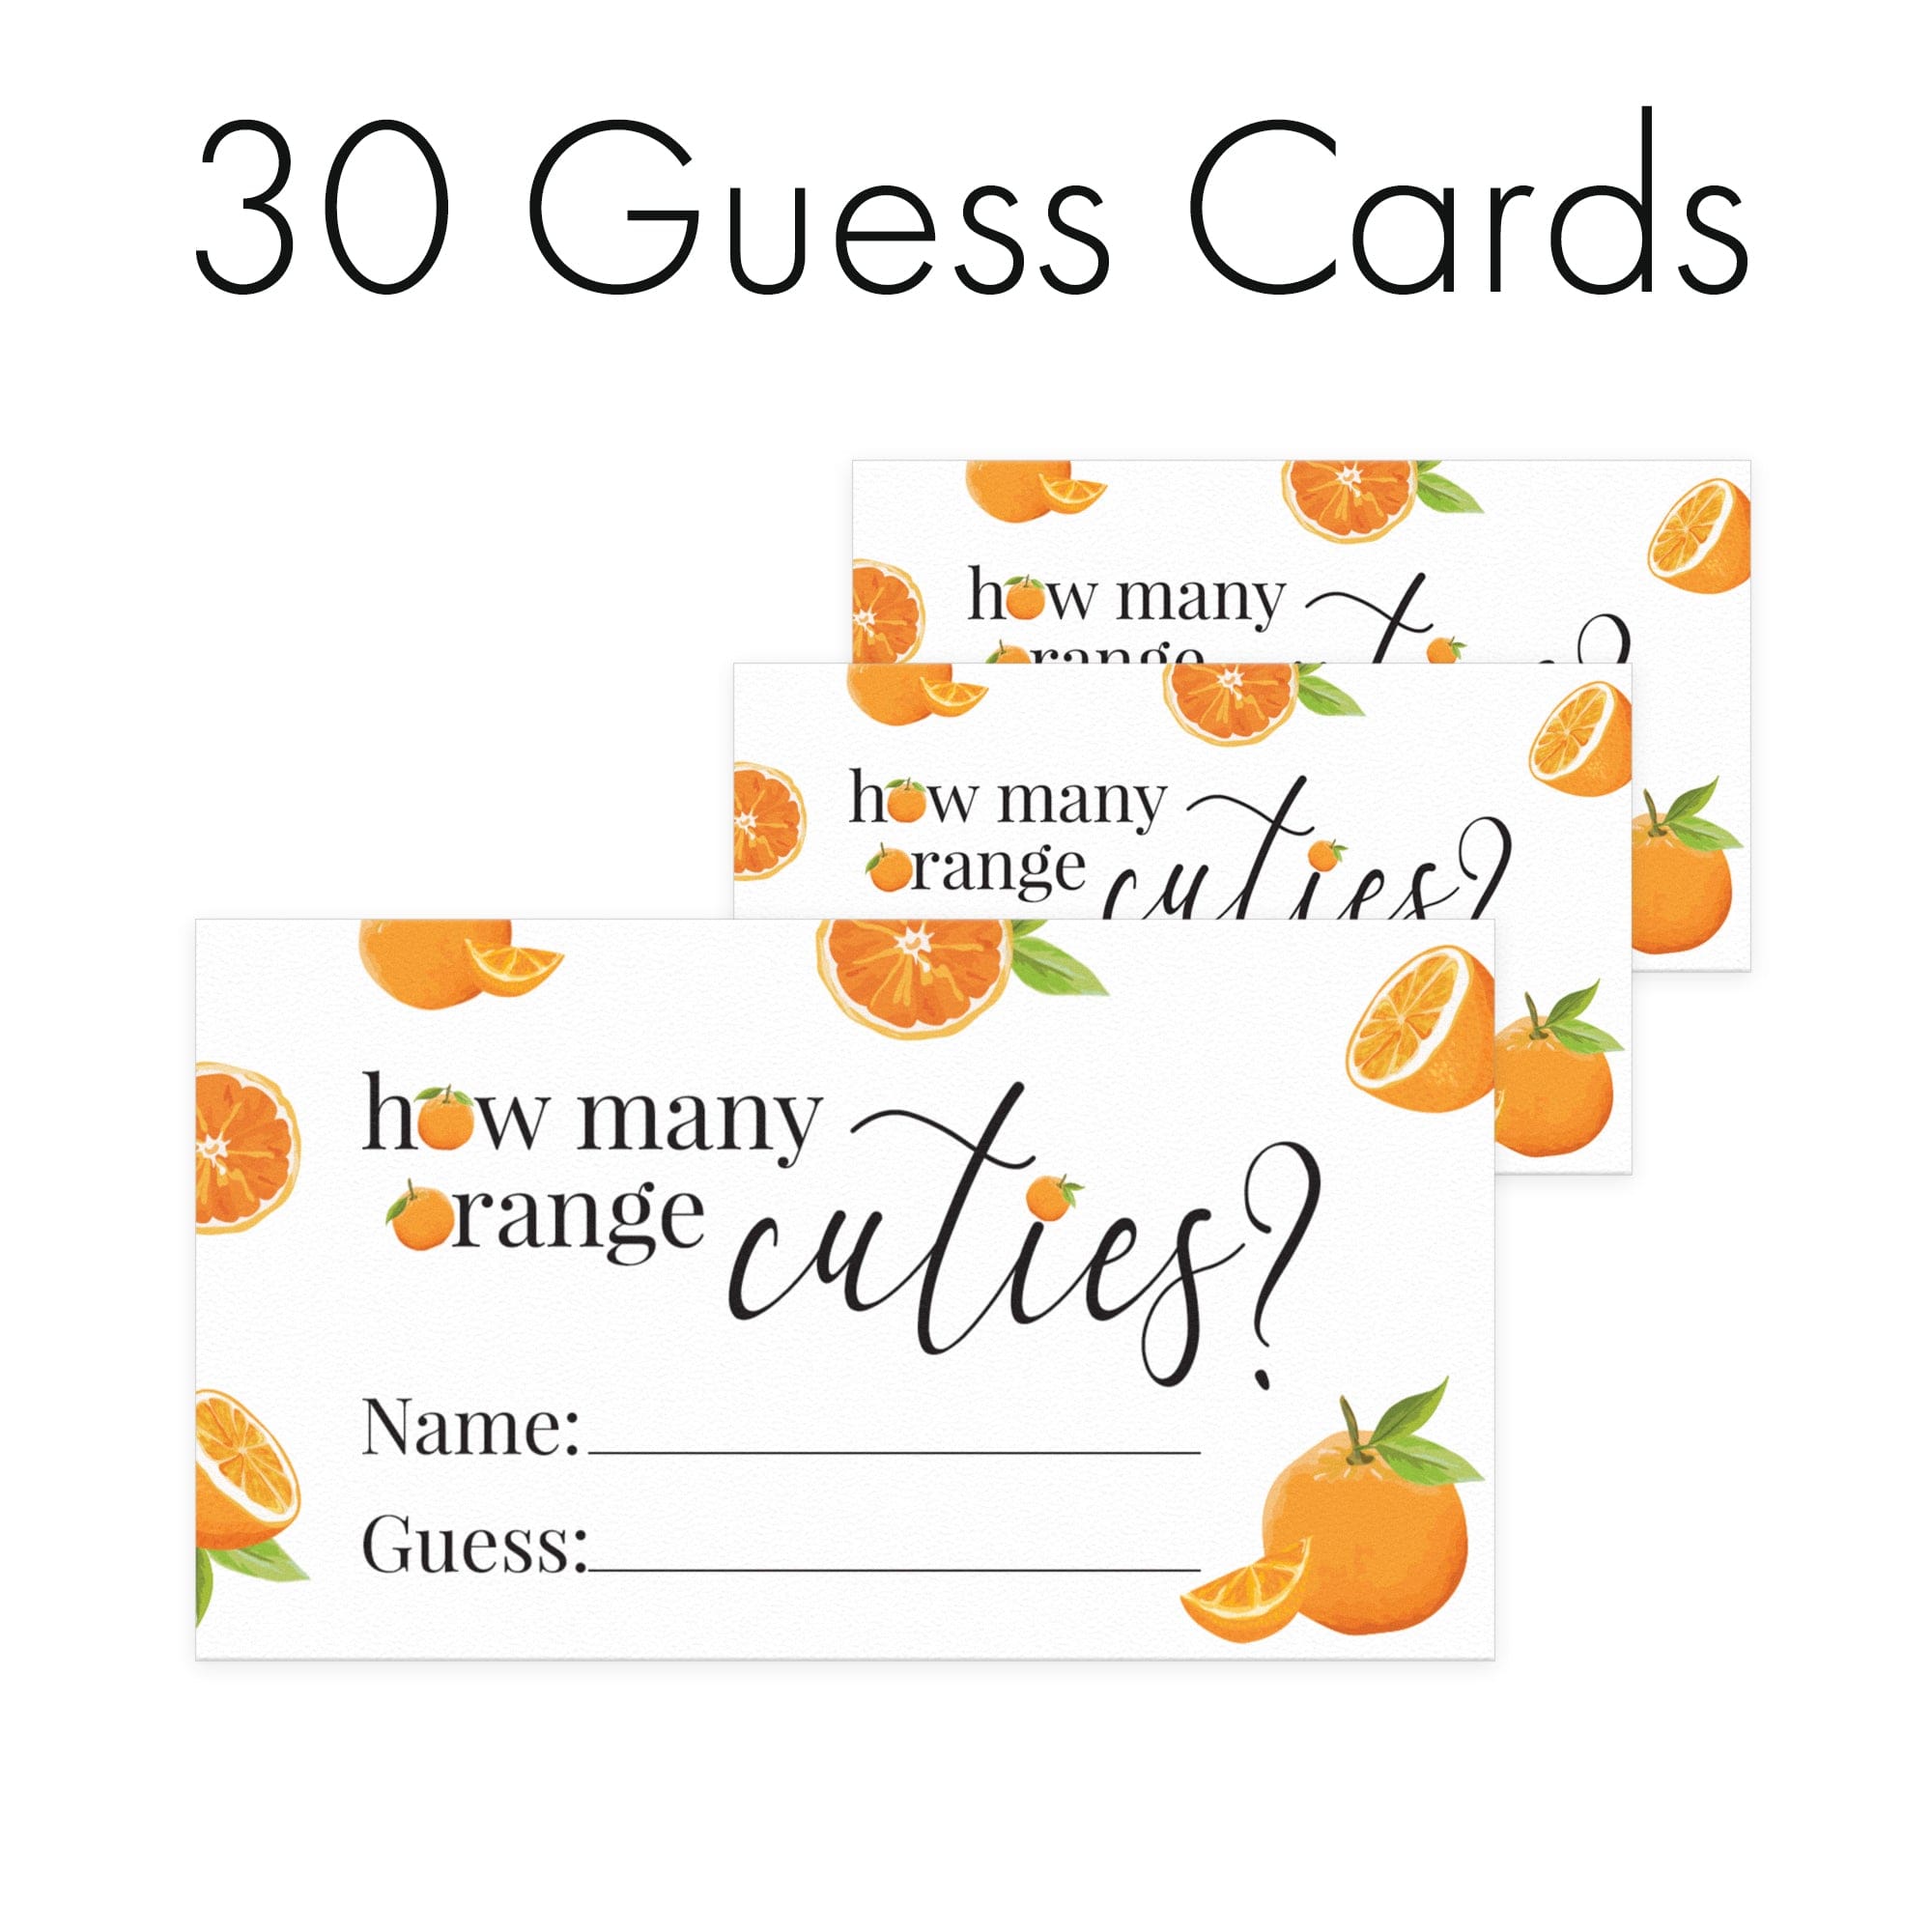 Extra Cards How Many Orange Cuties Do You See? Game